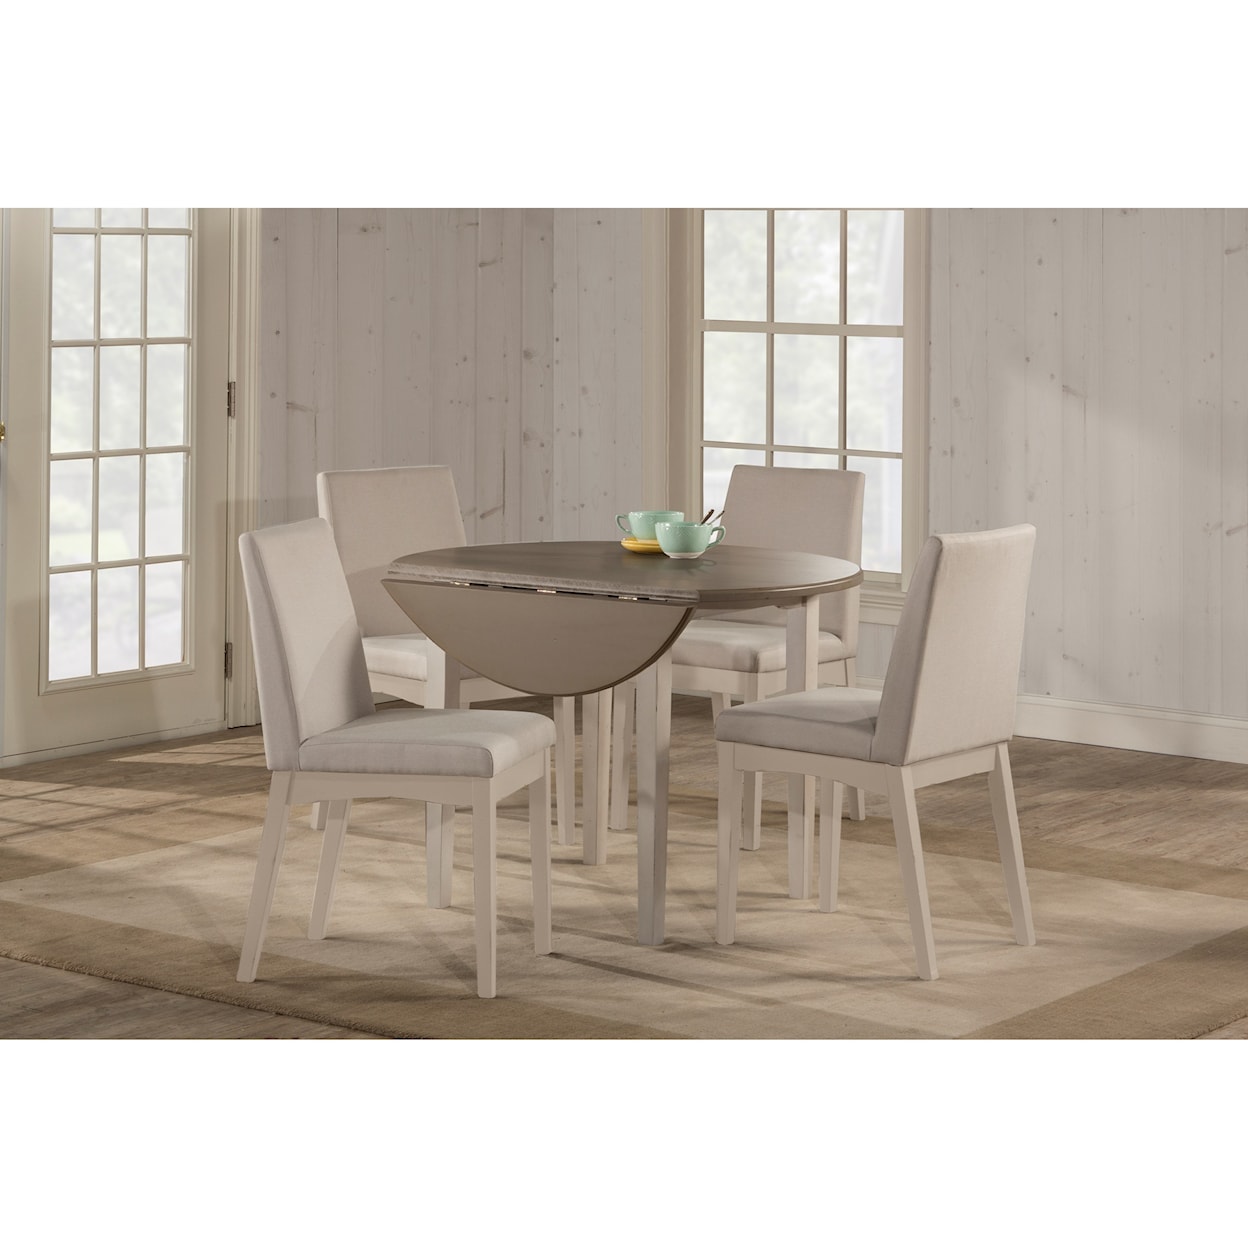 Hillsdale Clarion Round Drop Leaf Dining Table w/ Straight Leg